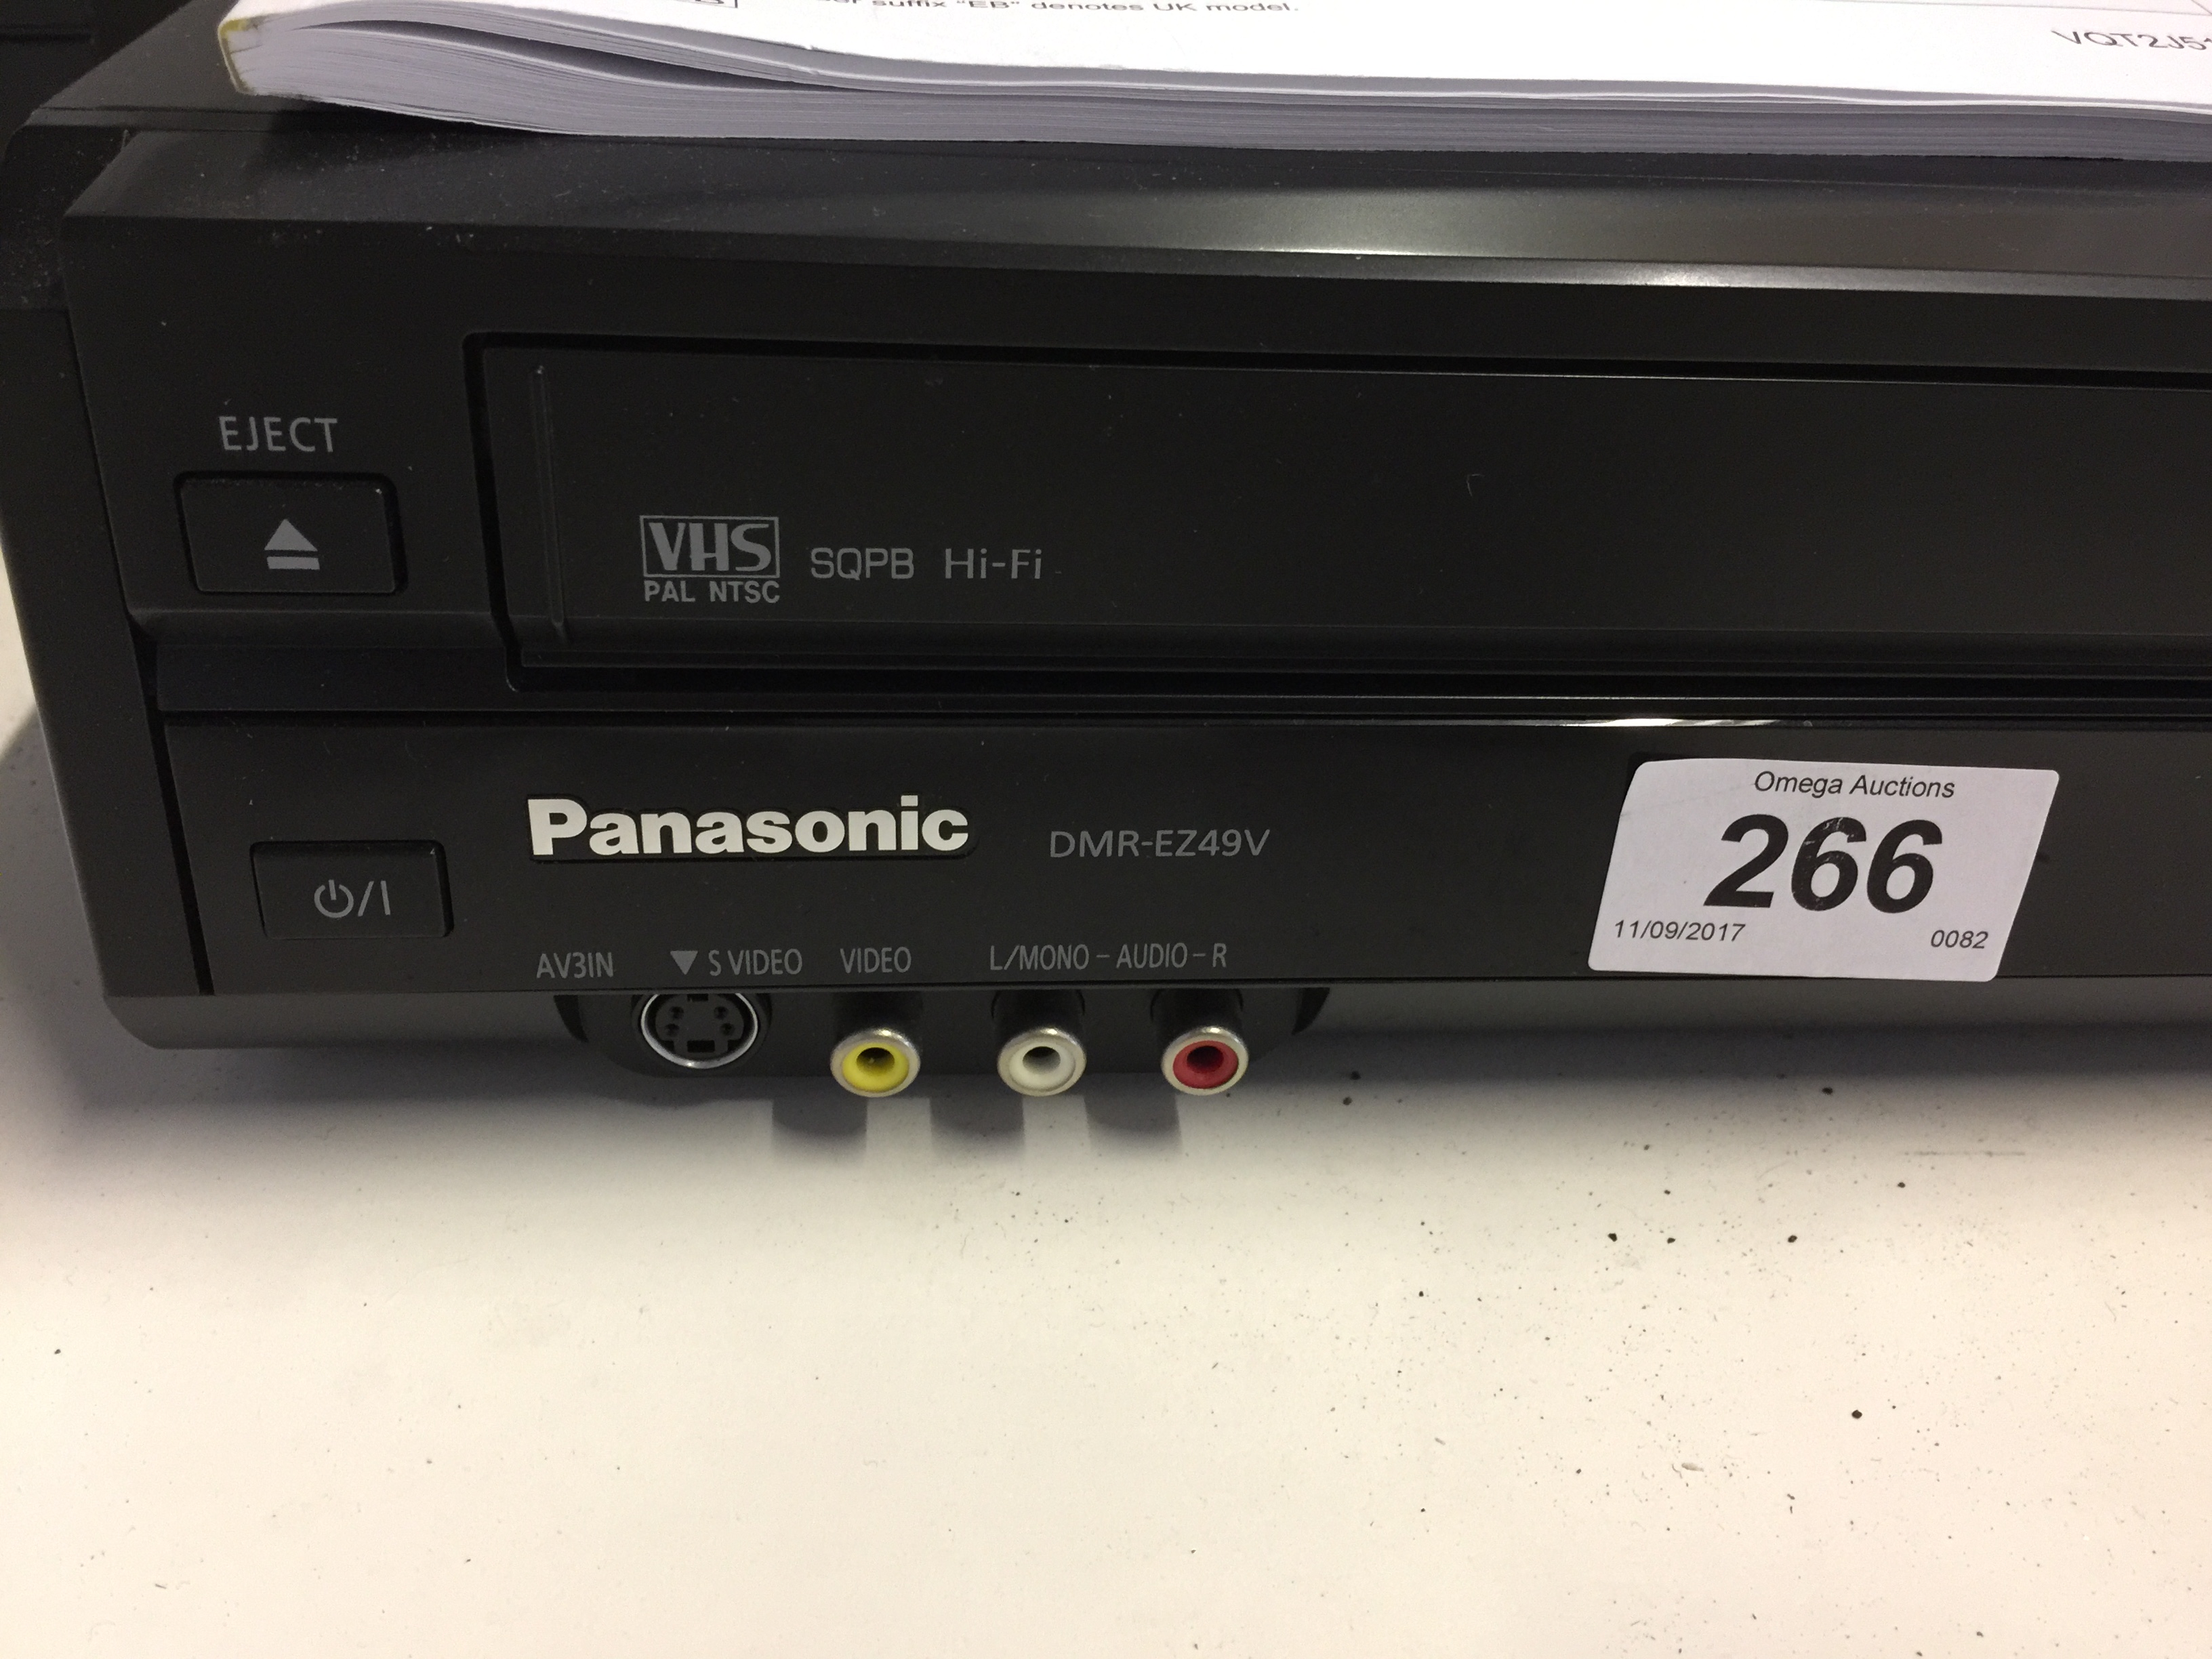 HIFI AUDIO - a Panasonic DMR-EZ49V Combi DVD VHS Video Recorder with Freeview. - Image 2 of 2